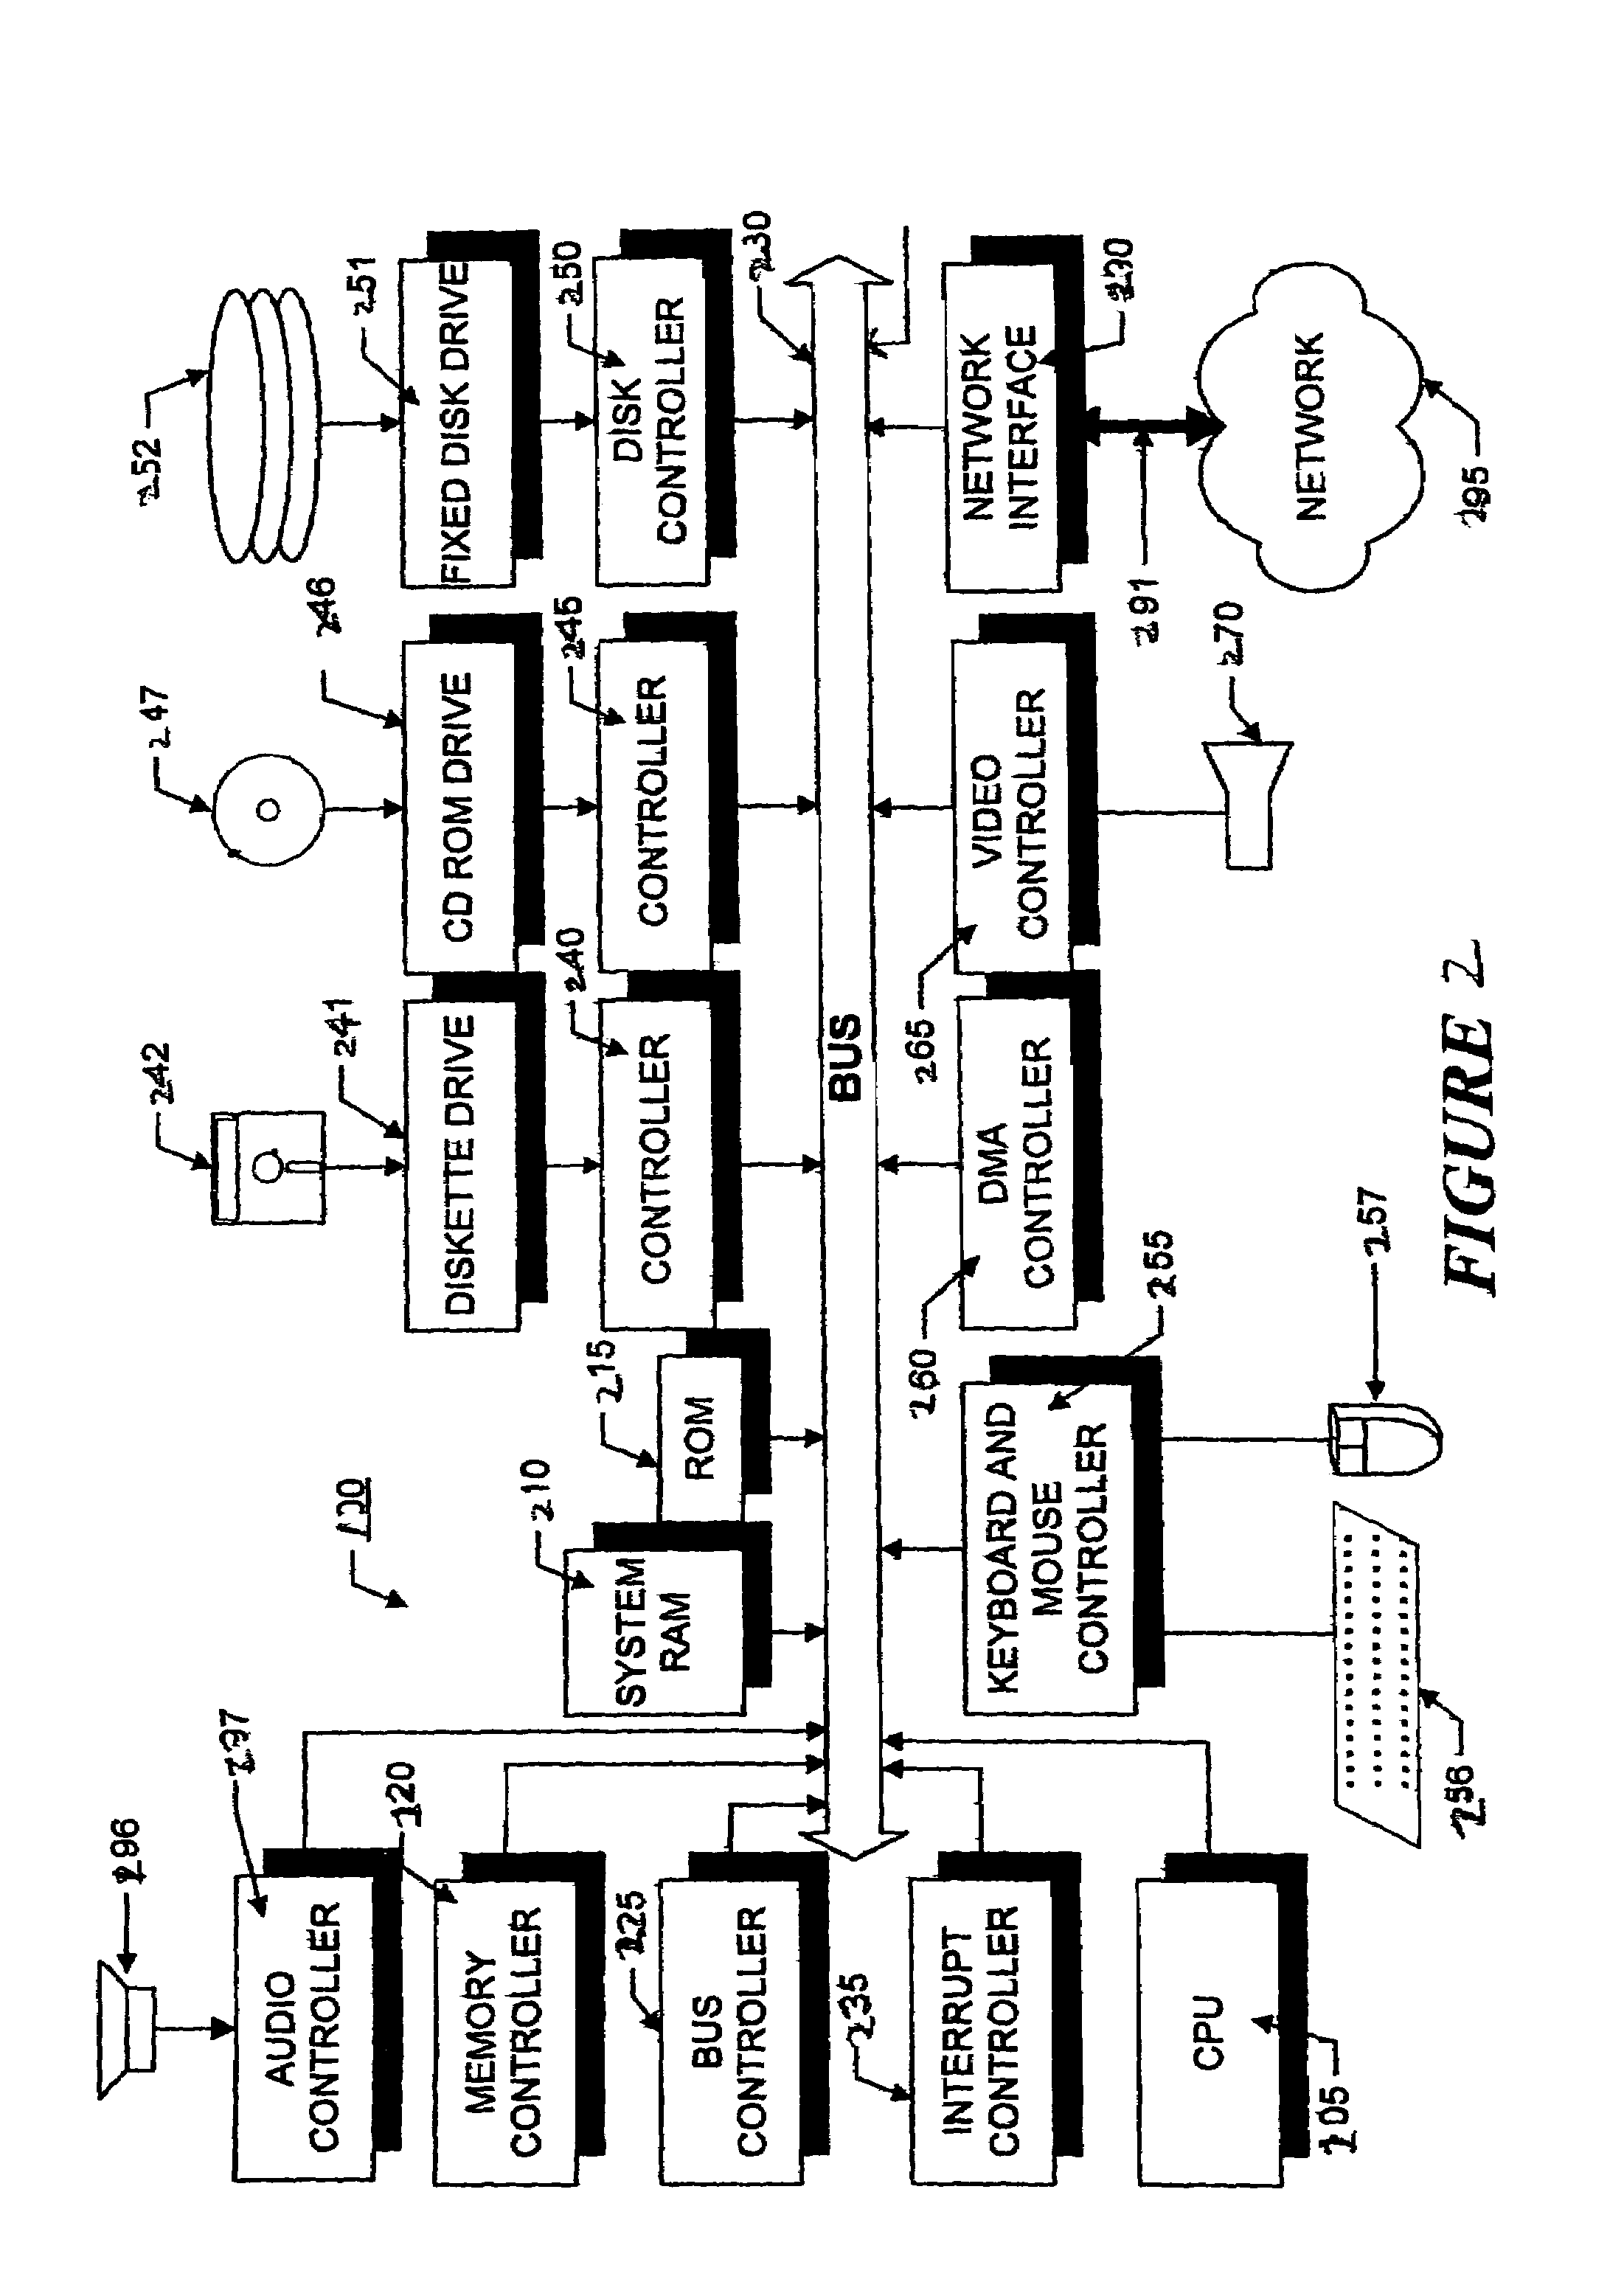 Method and apparatus for monitoring work center operations